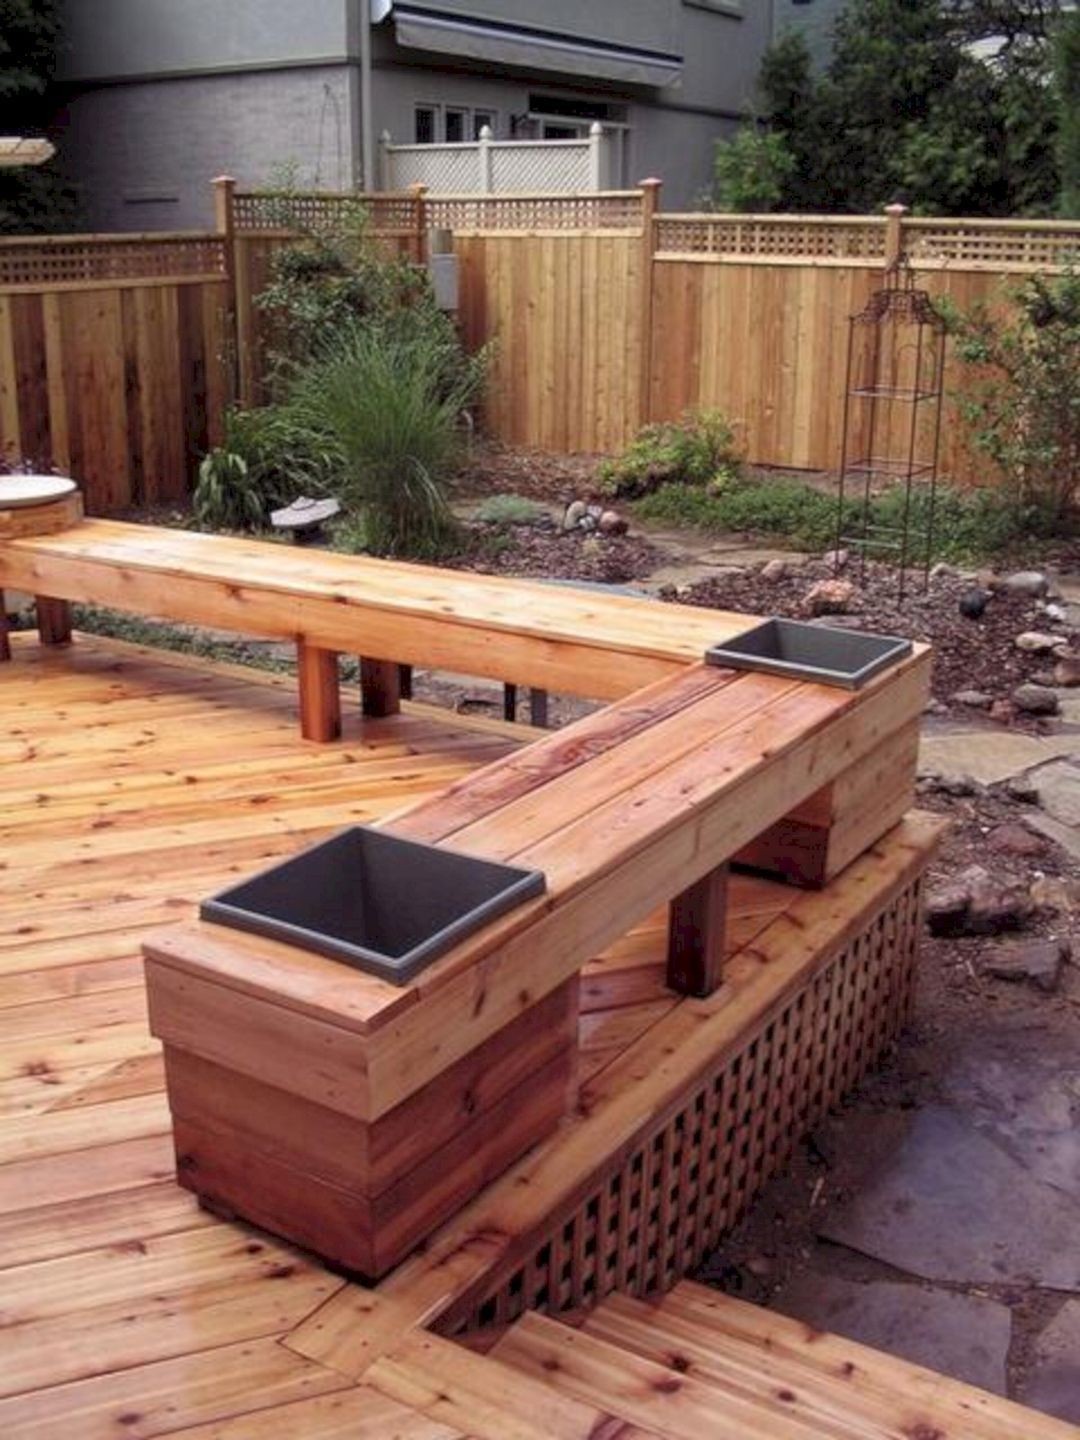 Cedar deck fence and bench with built in planters